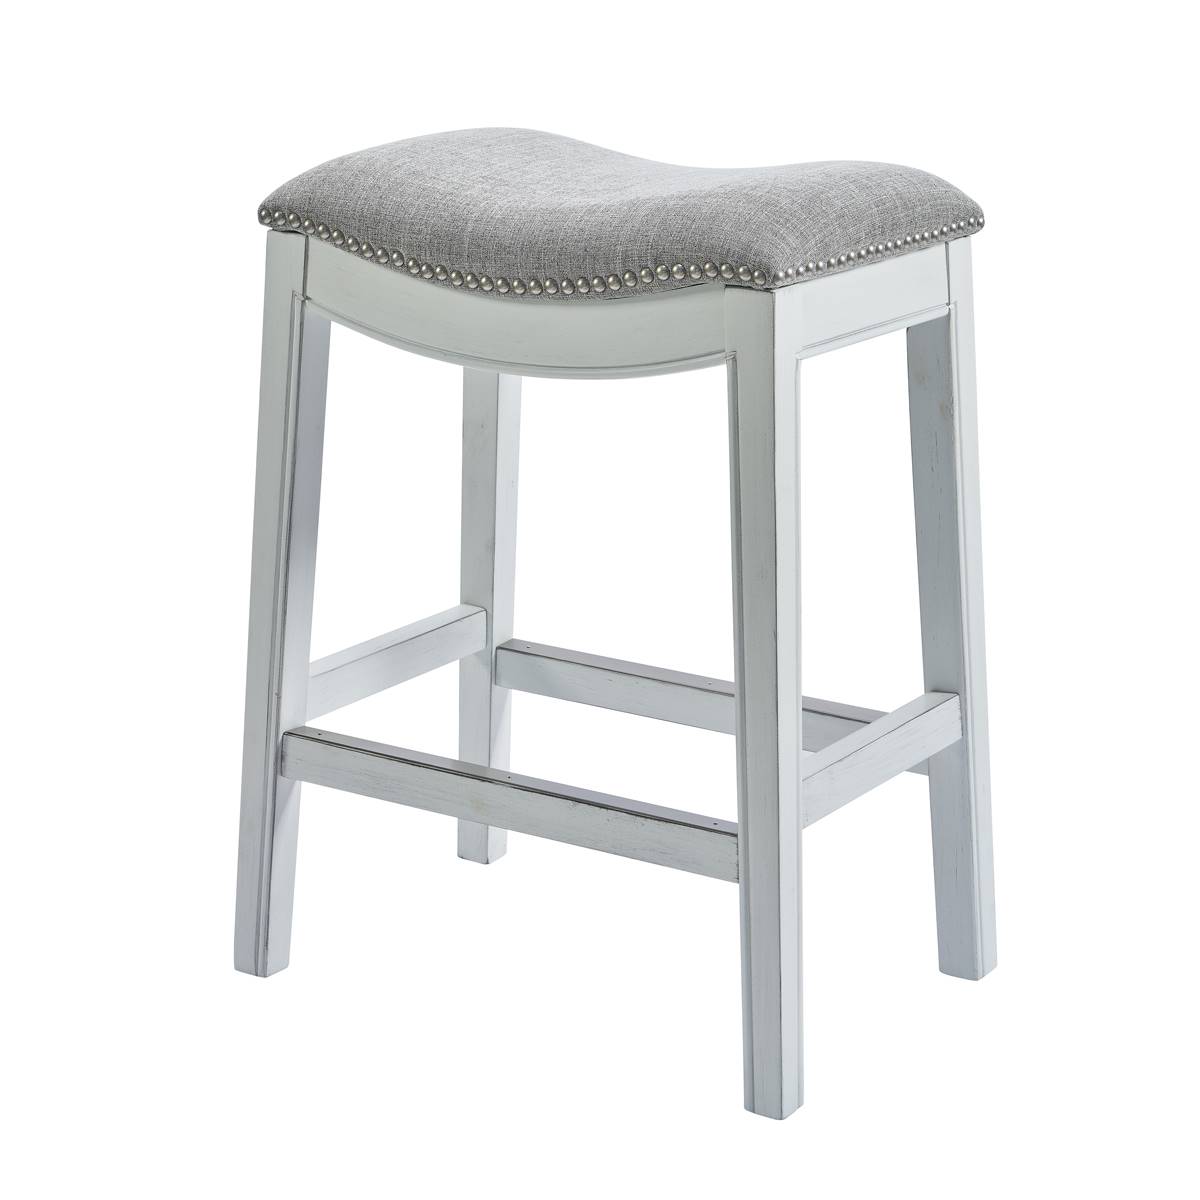 New Ridge Home Goods Zoey Counter-Height Saddle-Seat Barstool